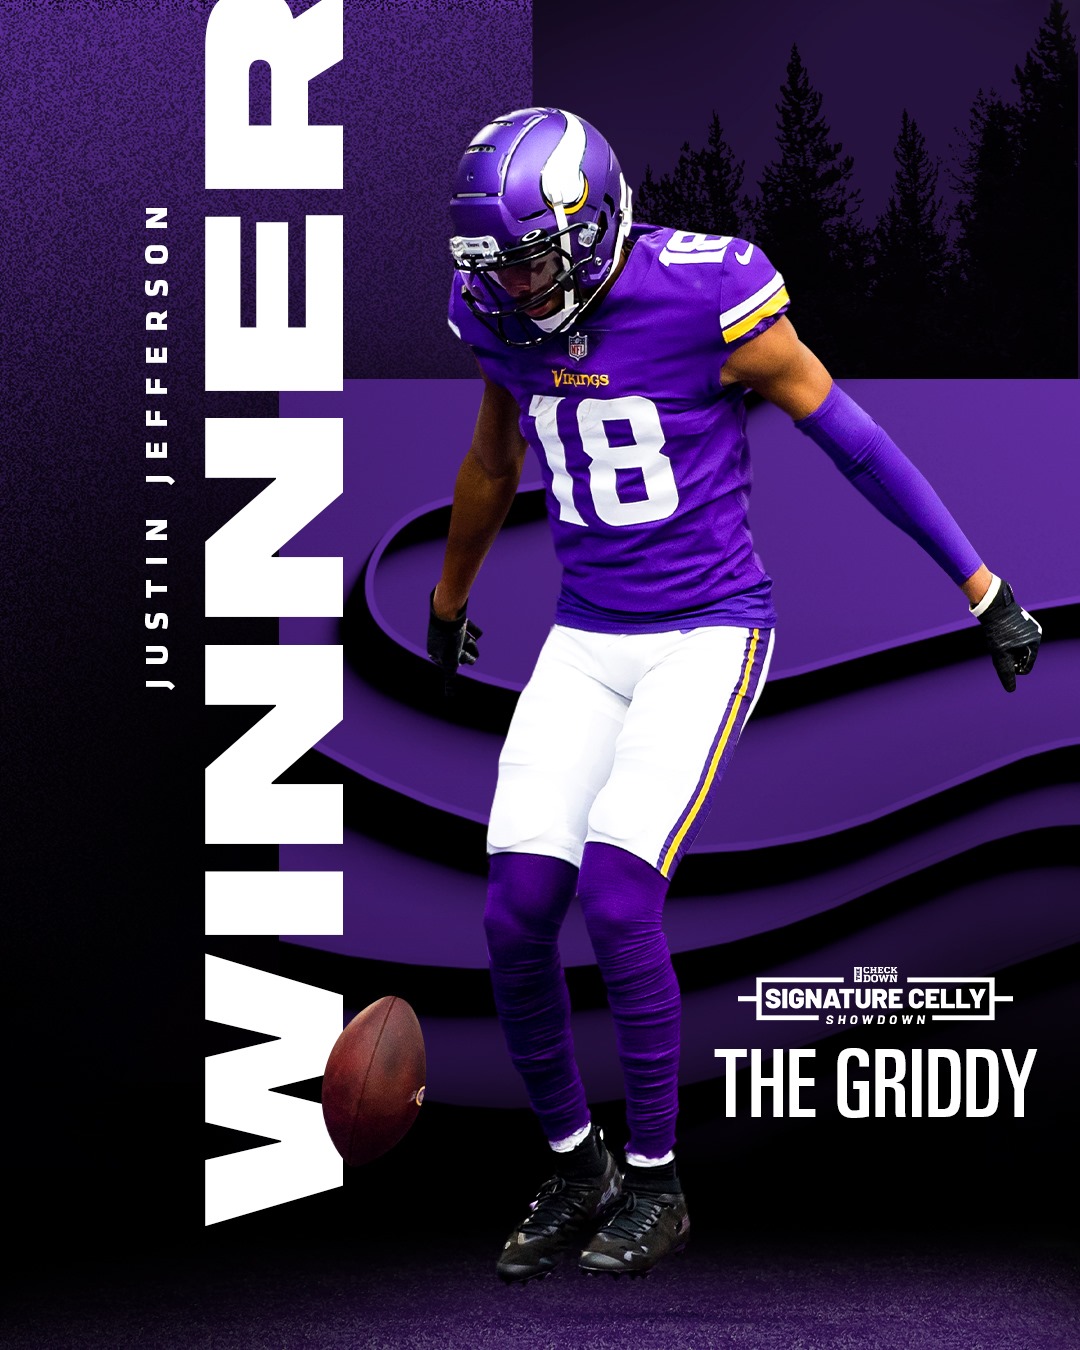 Minnesota Vikings   Griddy undefeated httpsmnvkngs2Thg0Dl 1080x1350